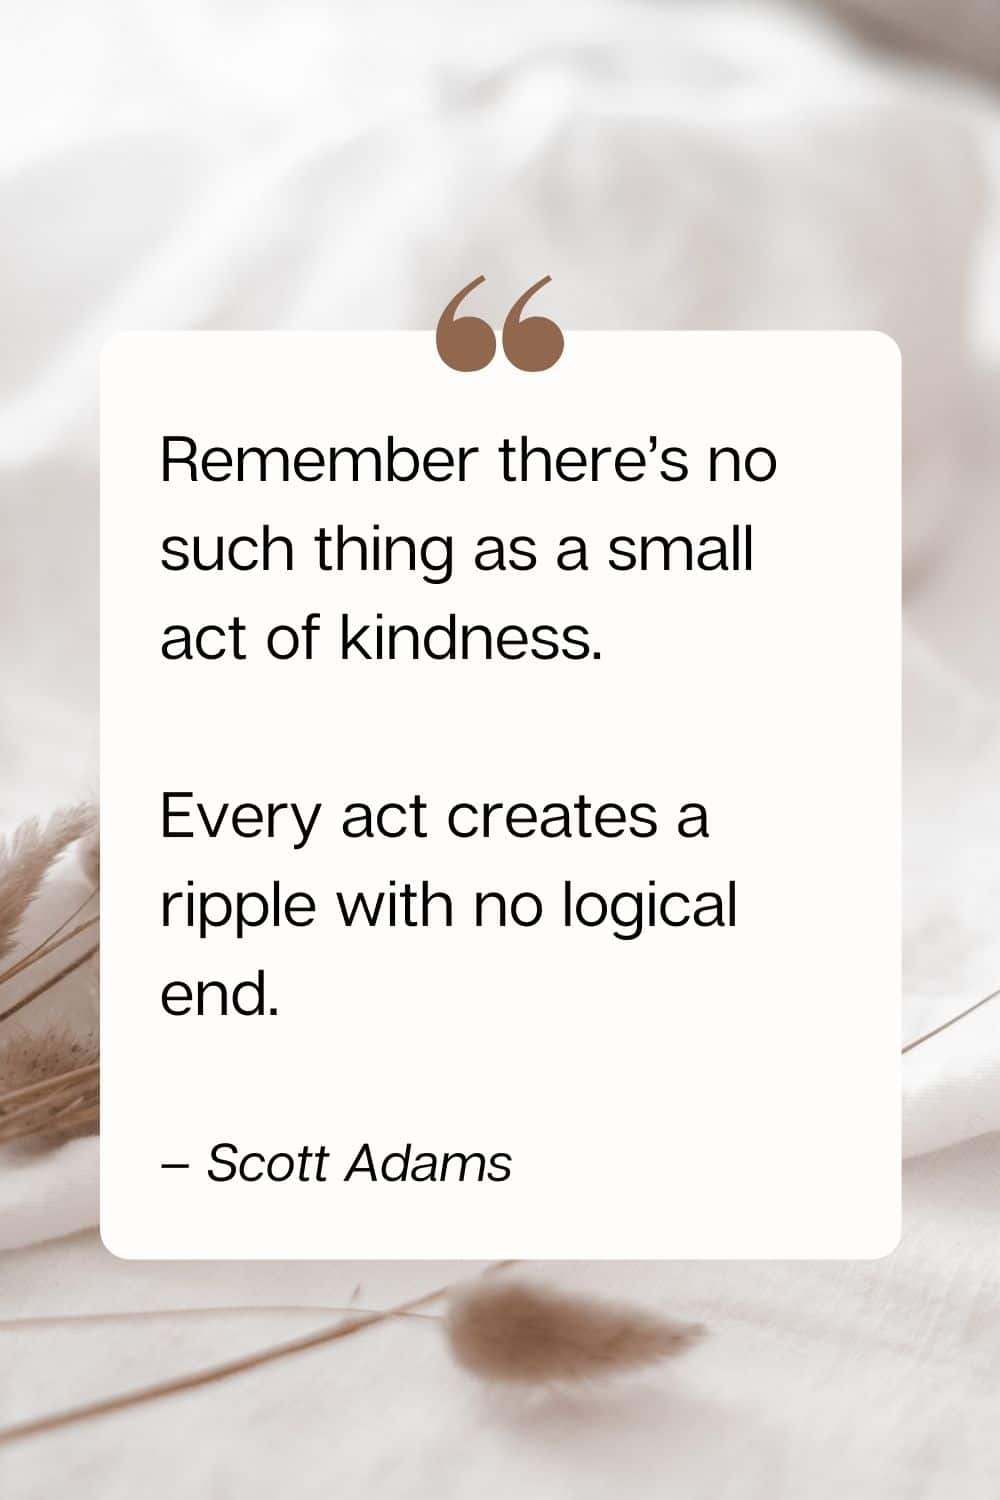 kindness quote - Remember there’s no such thing as a small act of kindness. Every act creates a ripple with no logical end. – Scott Adams